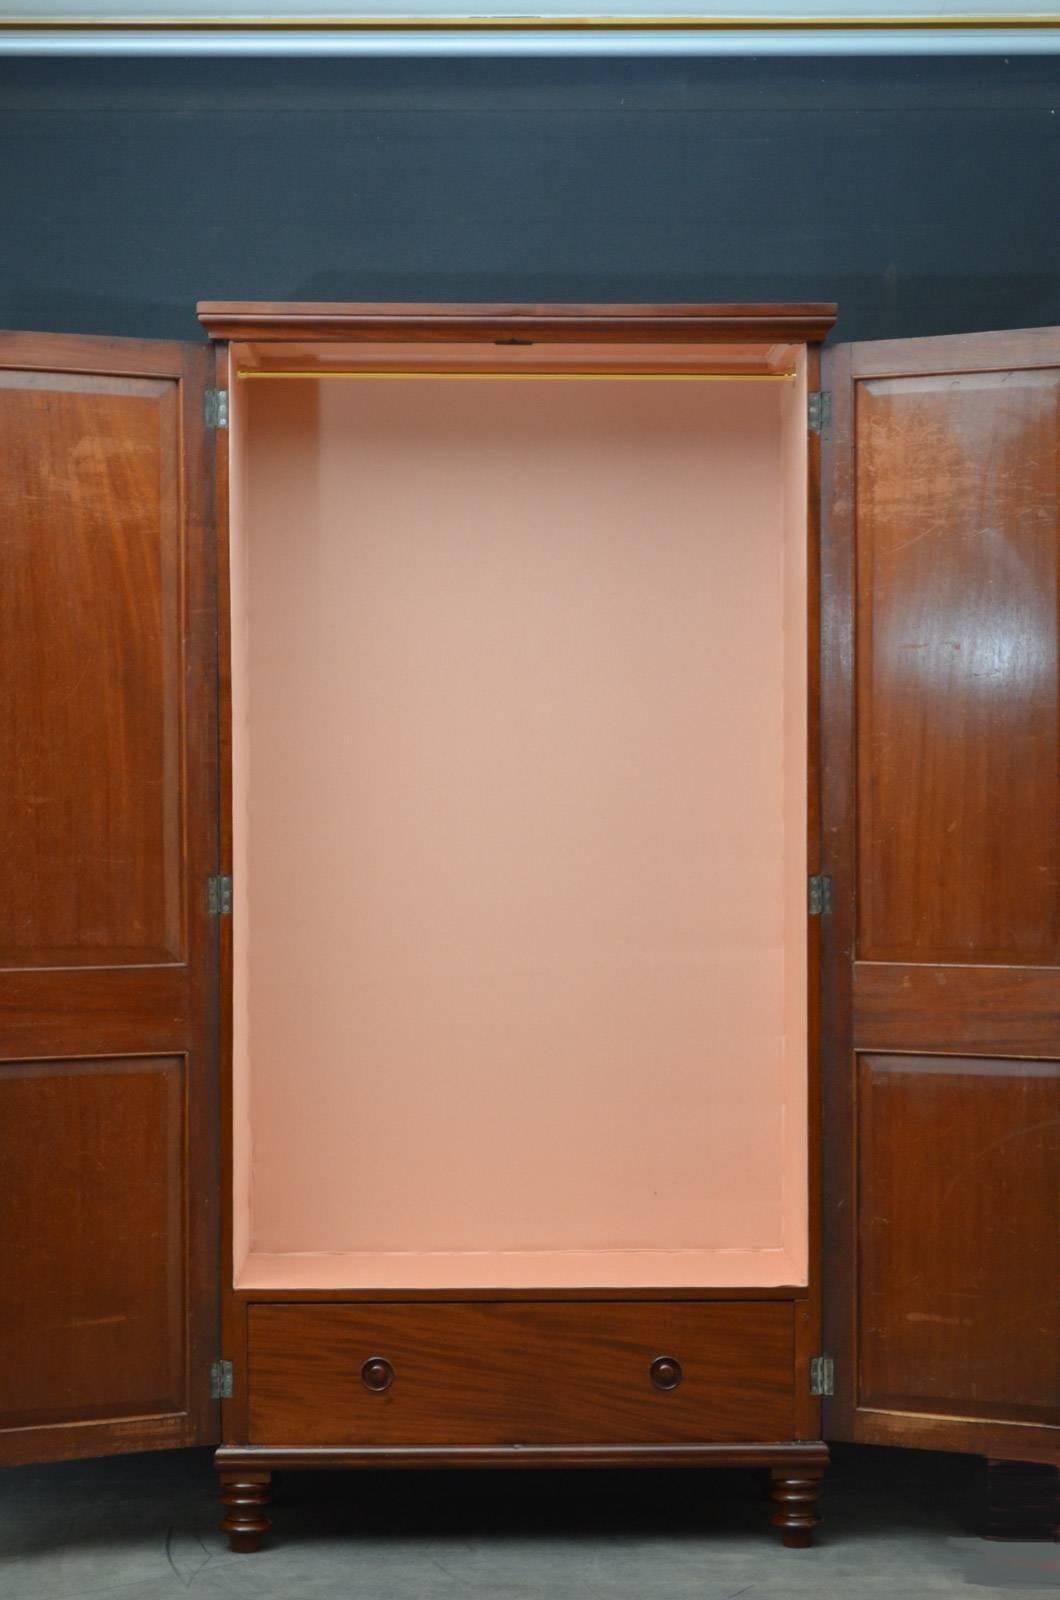 Sn4284, slim William IV mahogany wardrobe, having moulded cornice above a a pair of double panelled, figured mahogany doors fitted with original working lock and a key and enclosing relined interior with long hanging section and a drawer, all